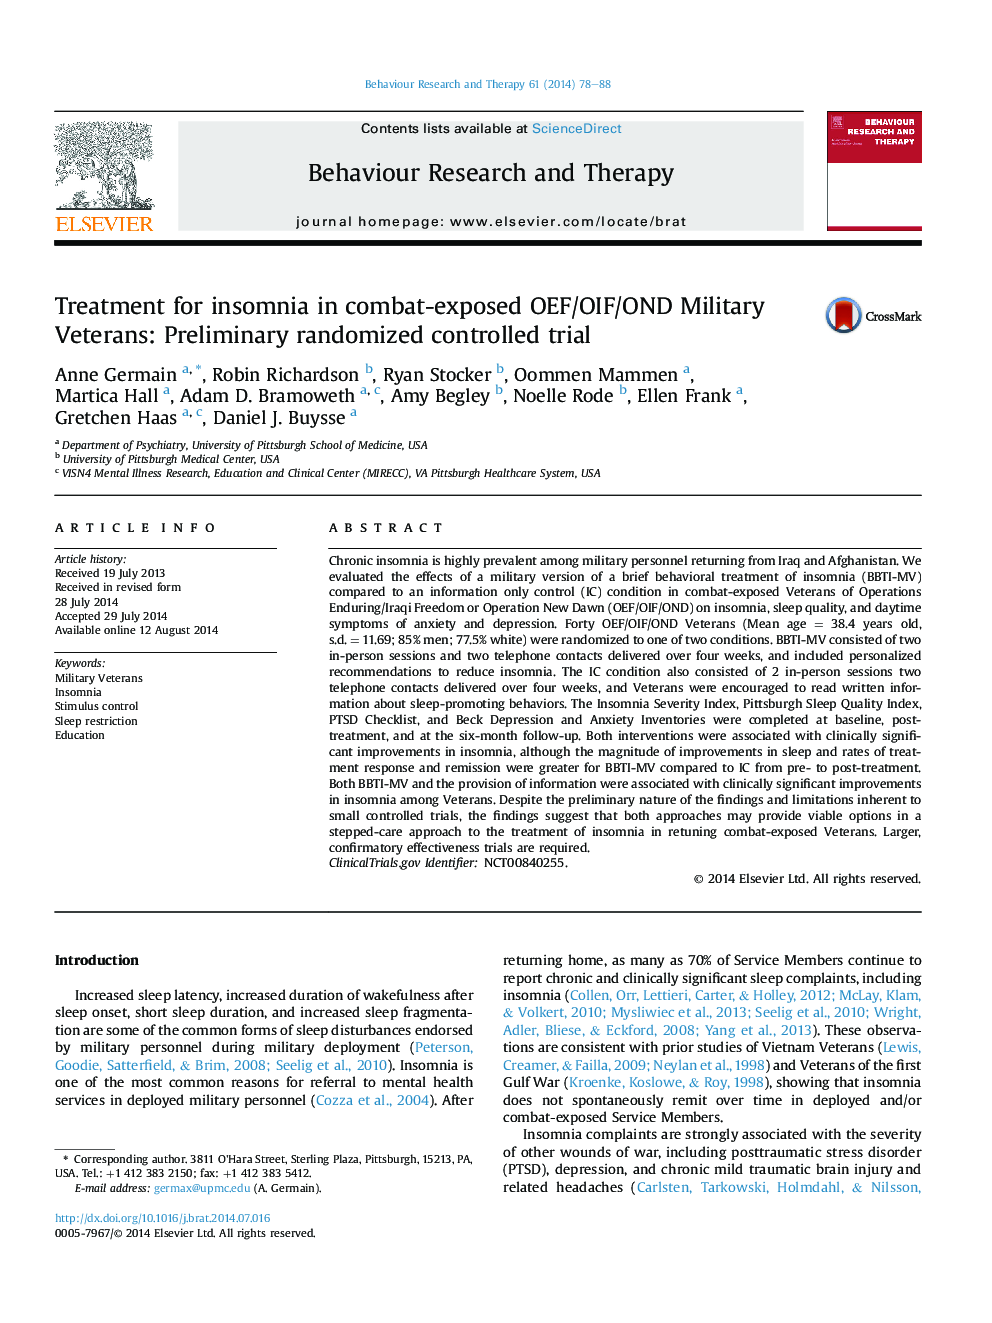 Treatment for insomnia in combat-exposed OEF/OIF/OND Military Veterans: Preliminary randomized controlled trial